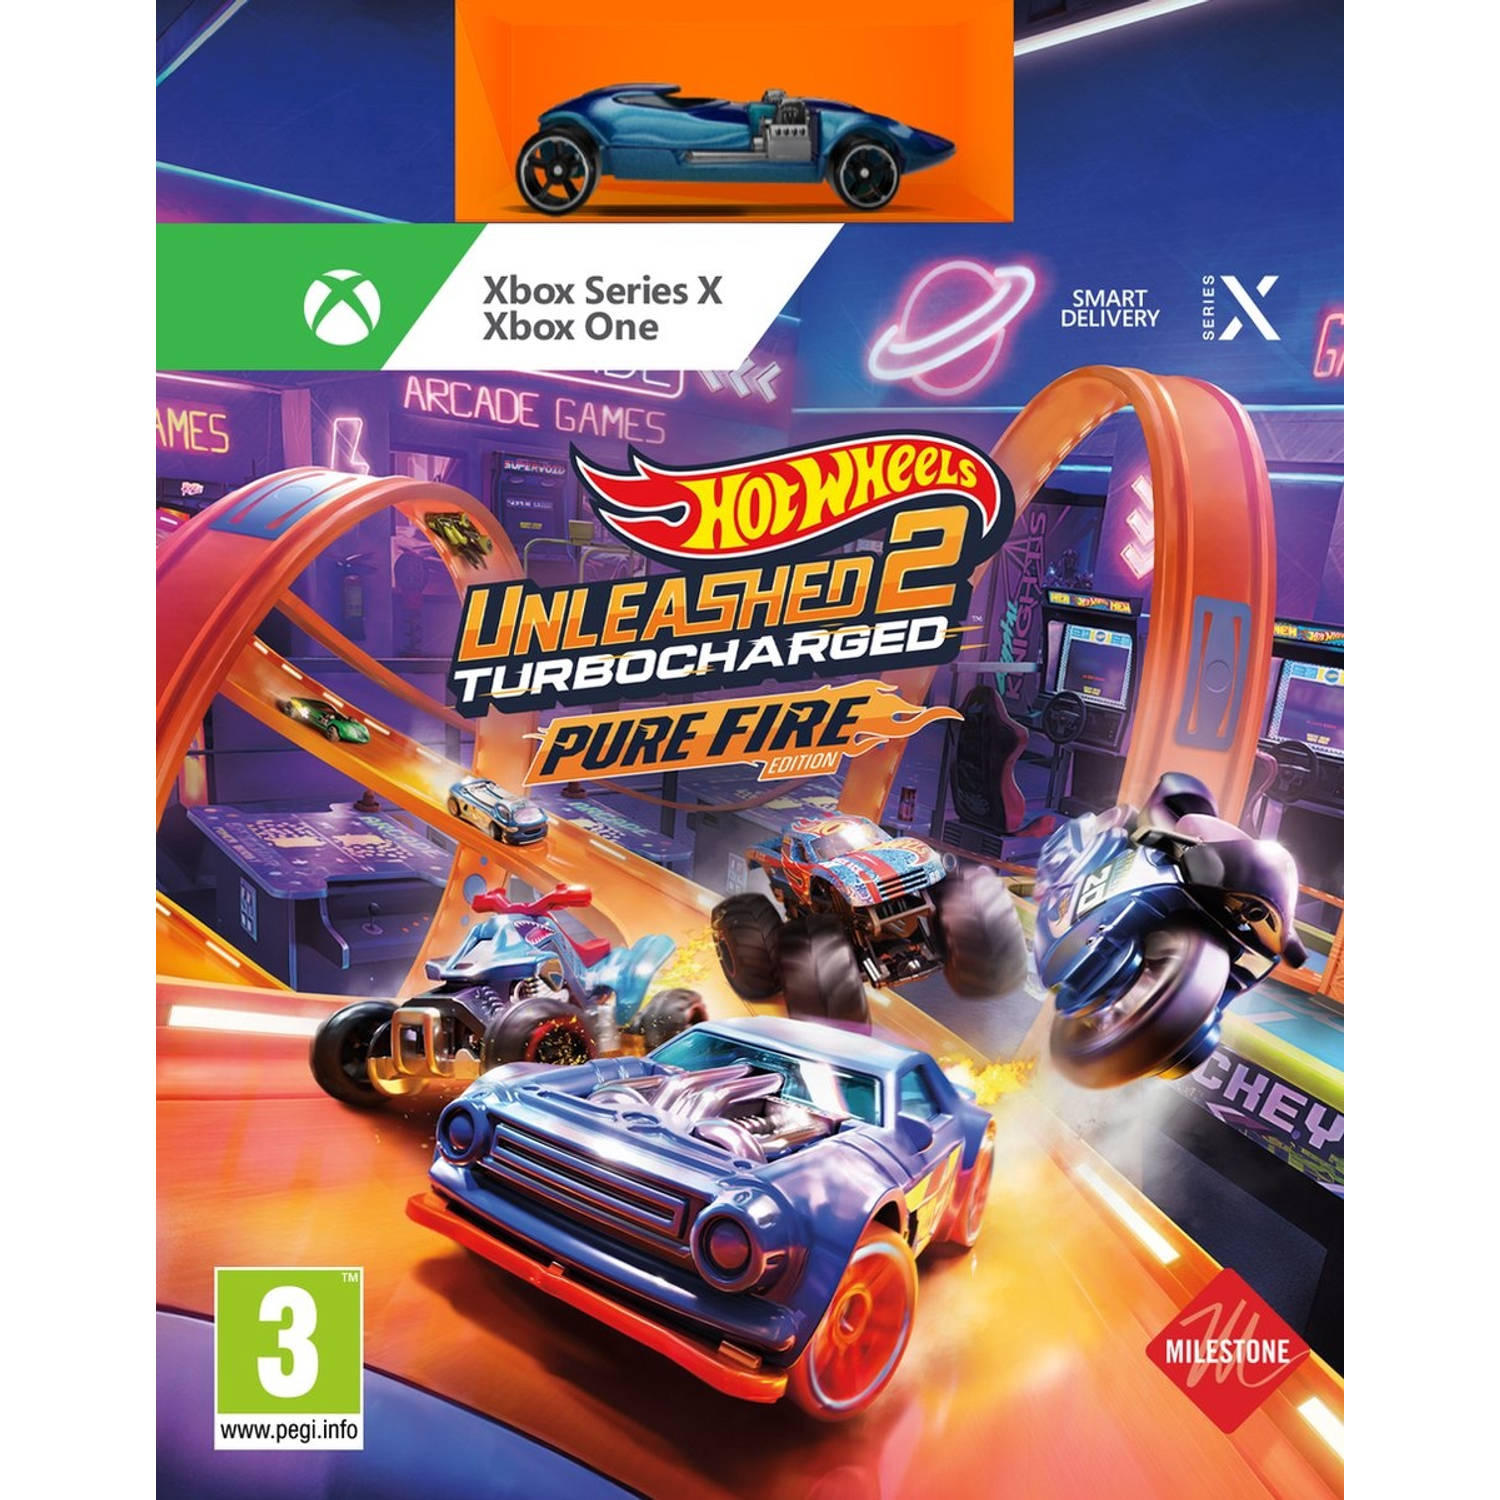 Hot Wheels Unleashed 2 Turbocharged Pure Fire Edition Xbox One & Series X